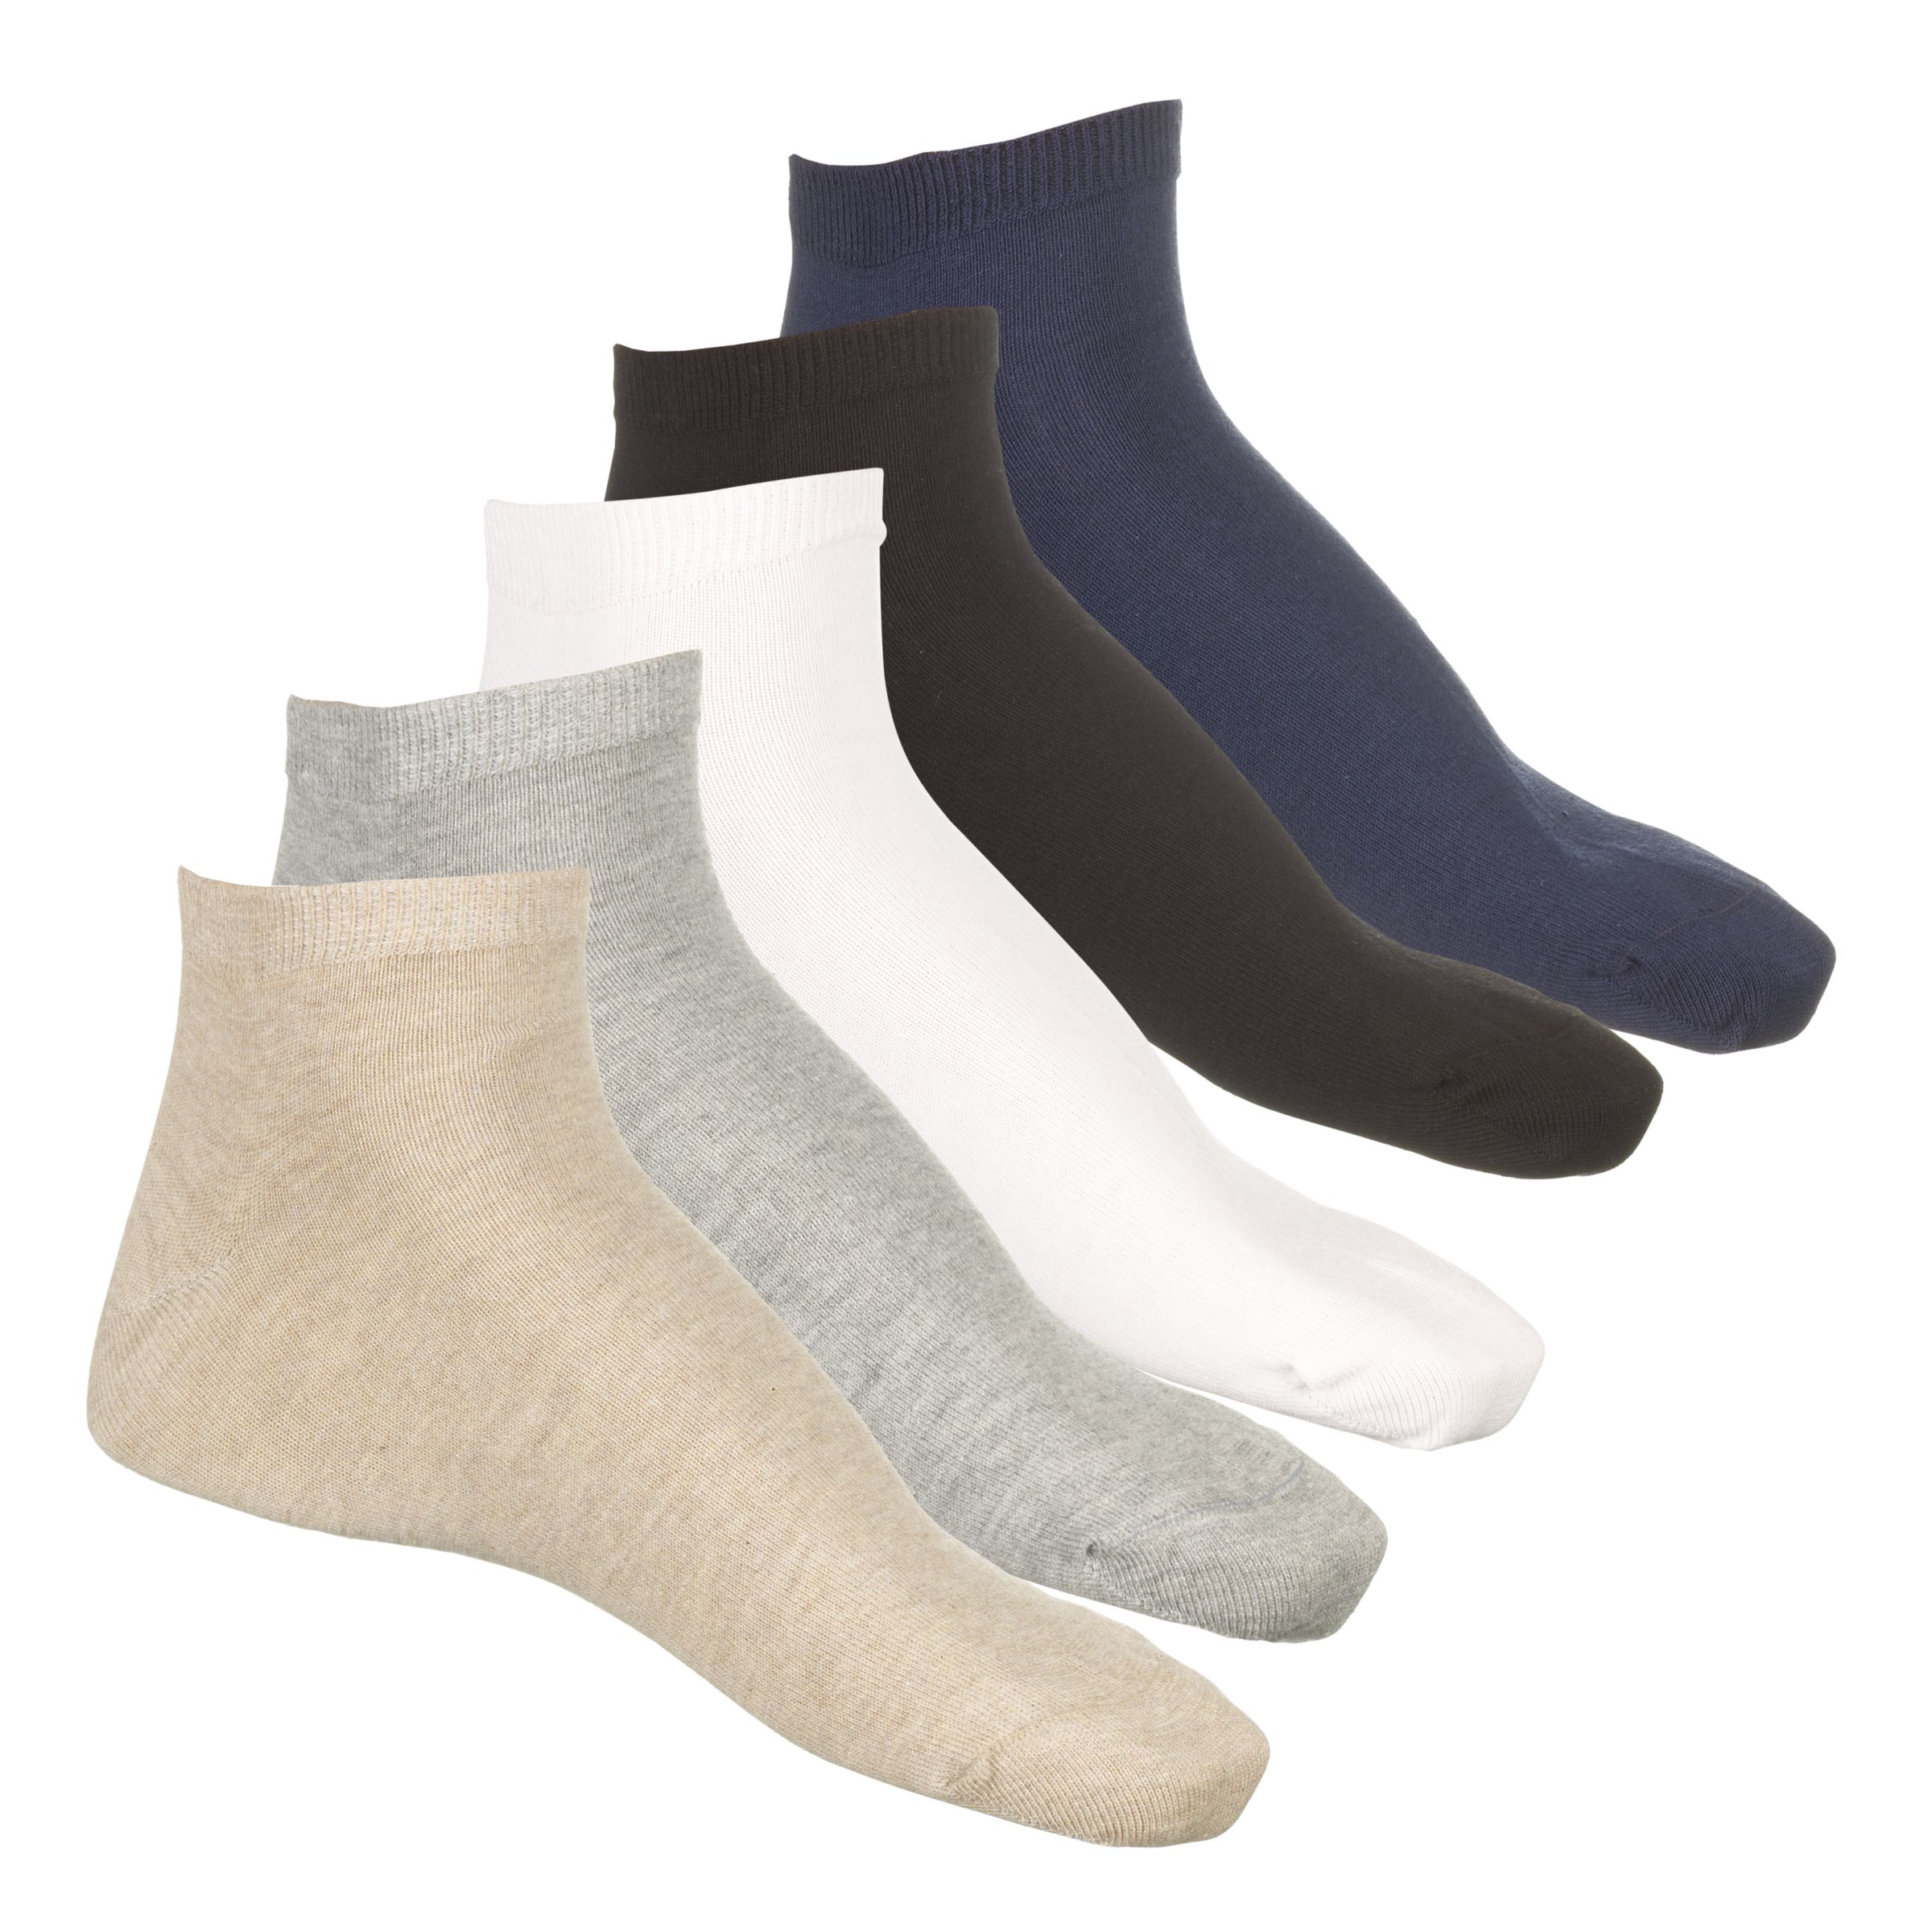 John Lewis & Partners Ankle Socks, Pack of 5, One Size